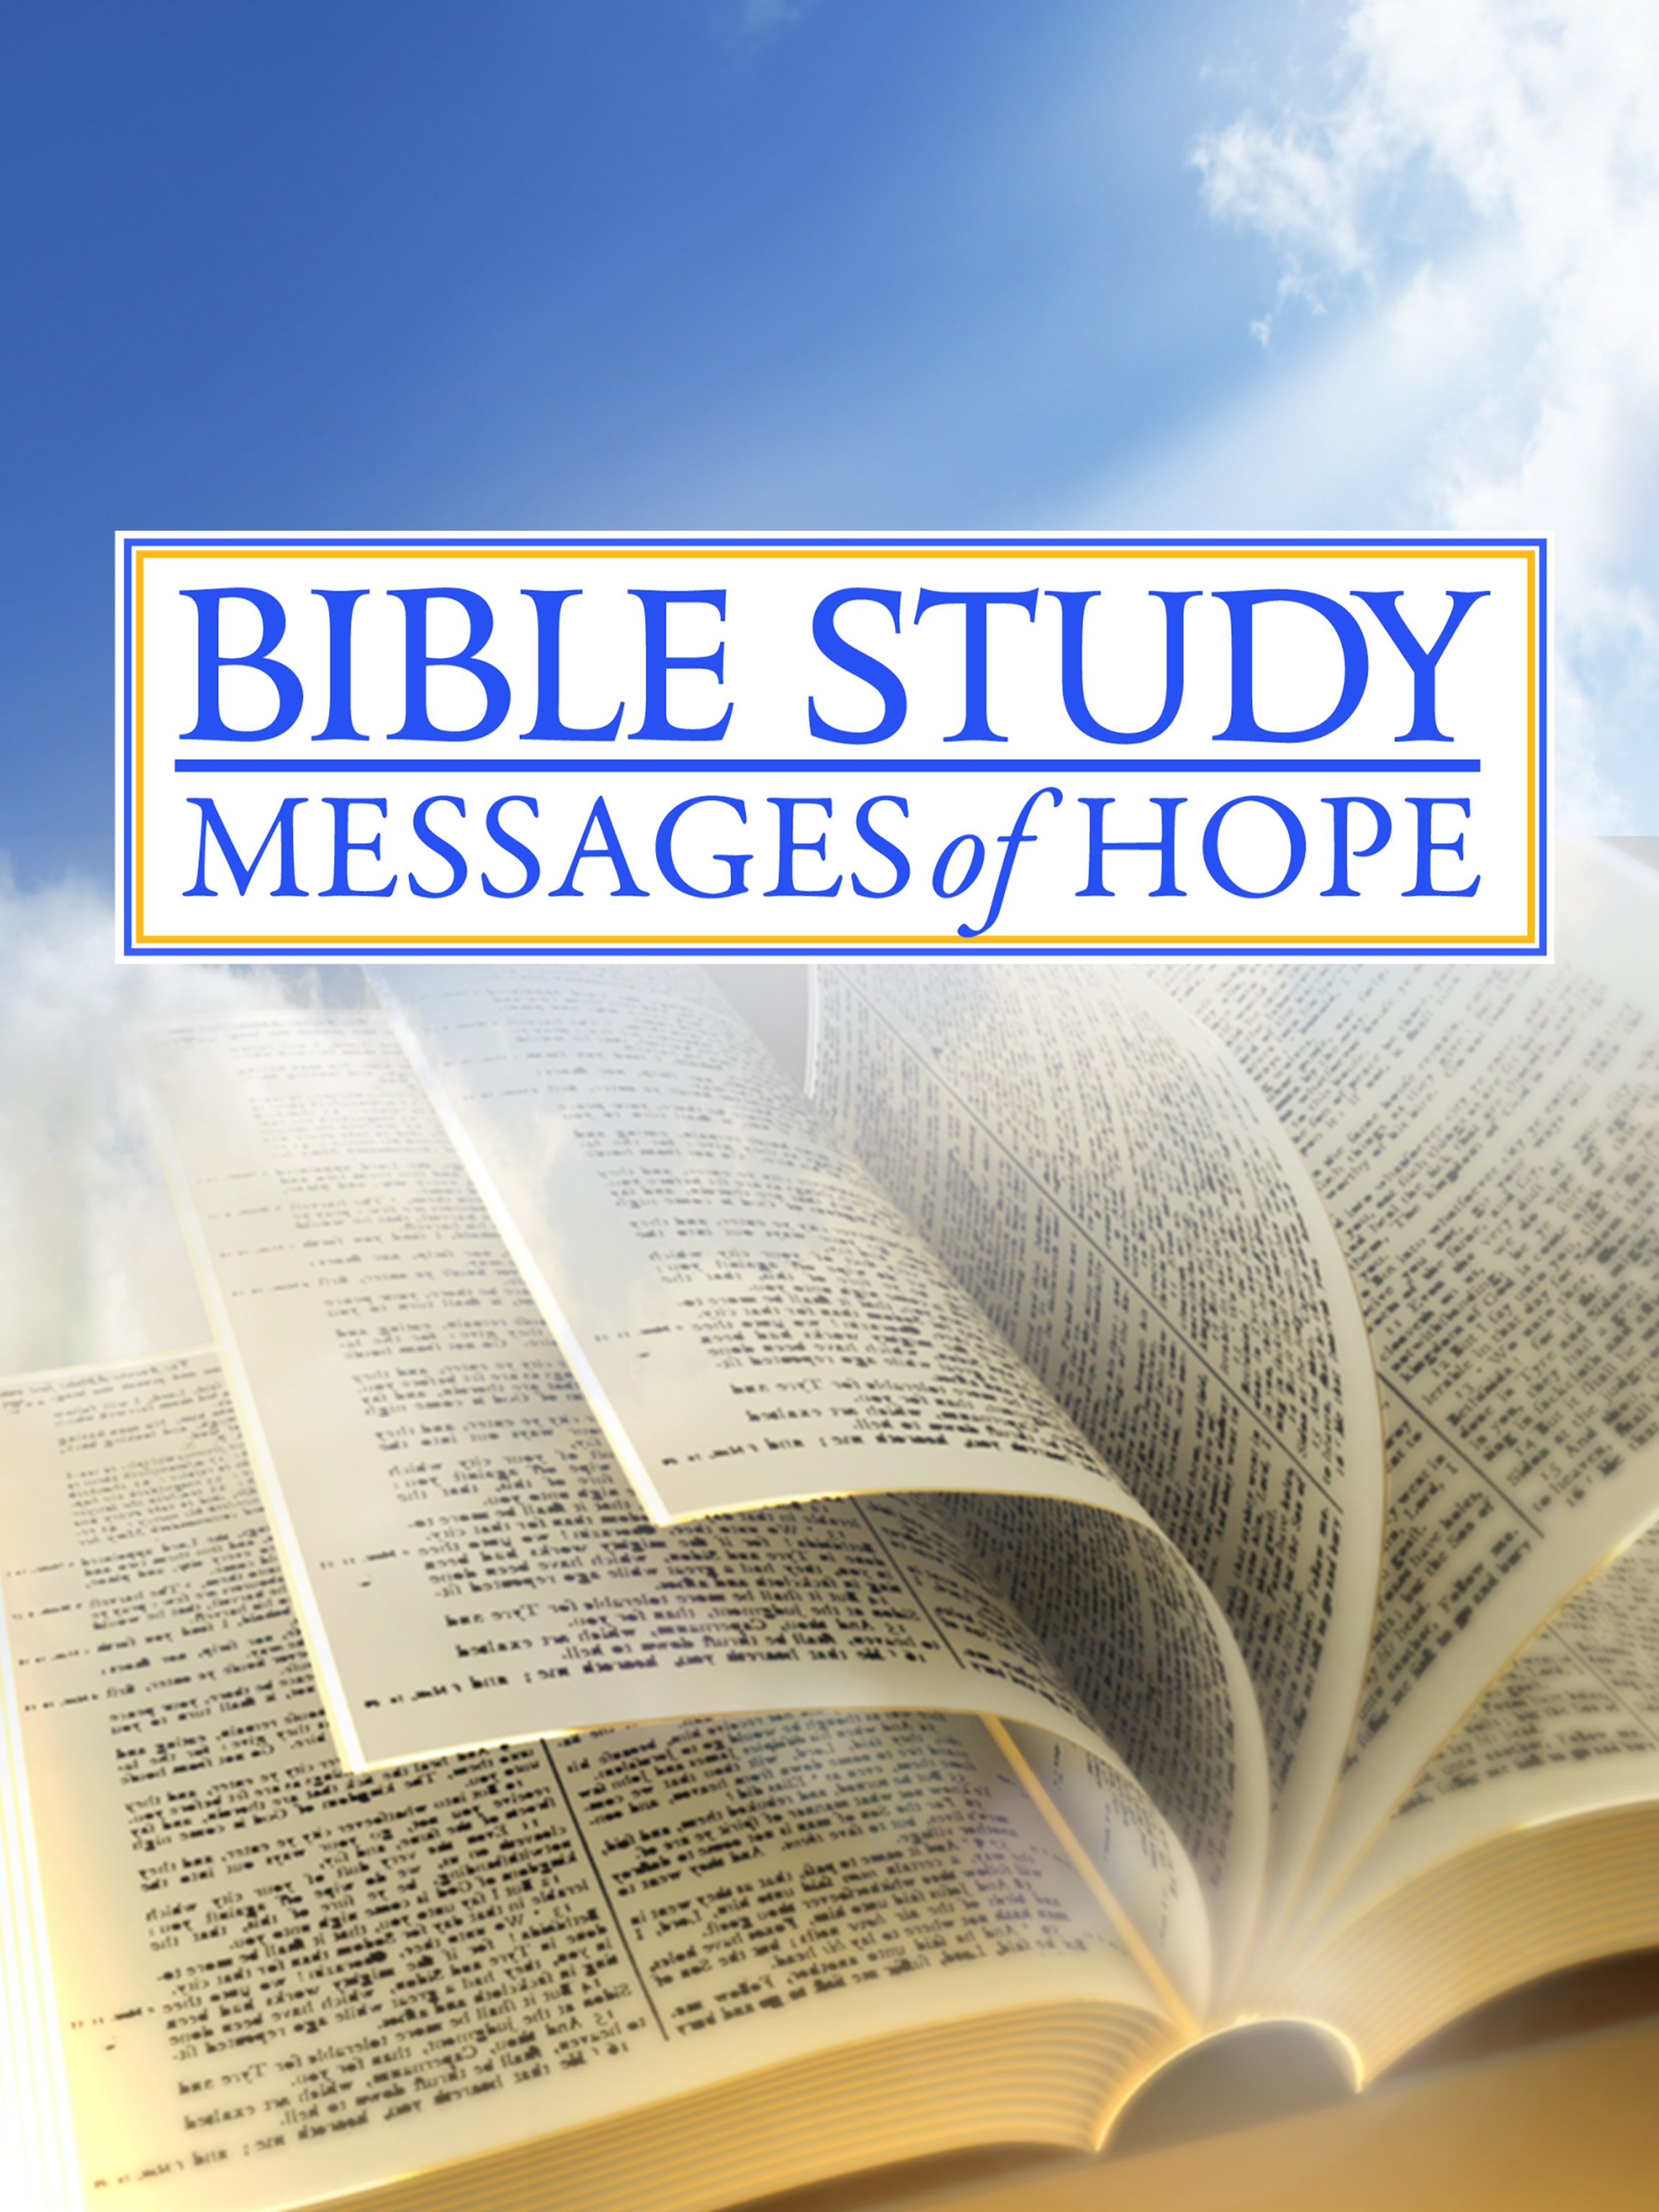 Bible Study: Messages of Hope dcg-mark-poster